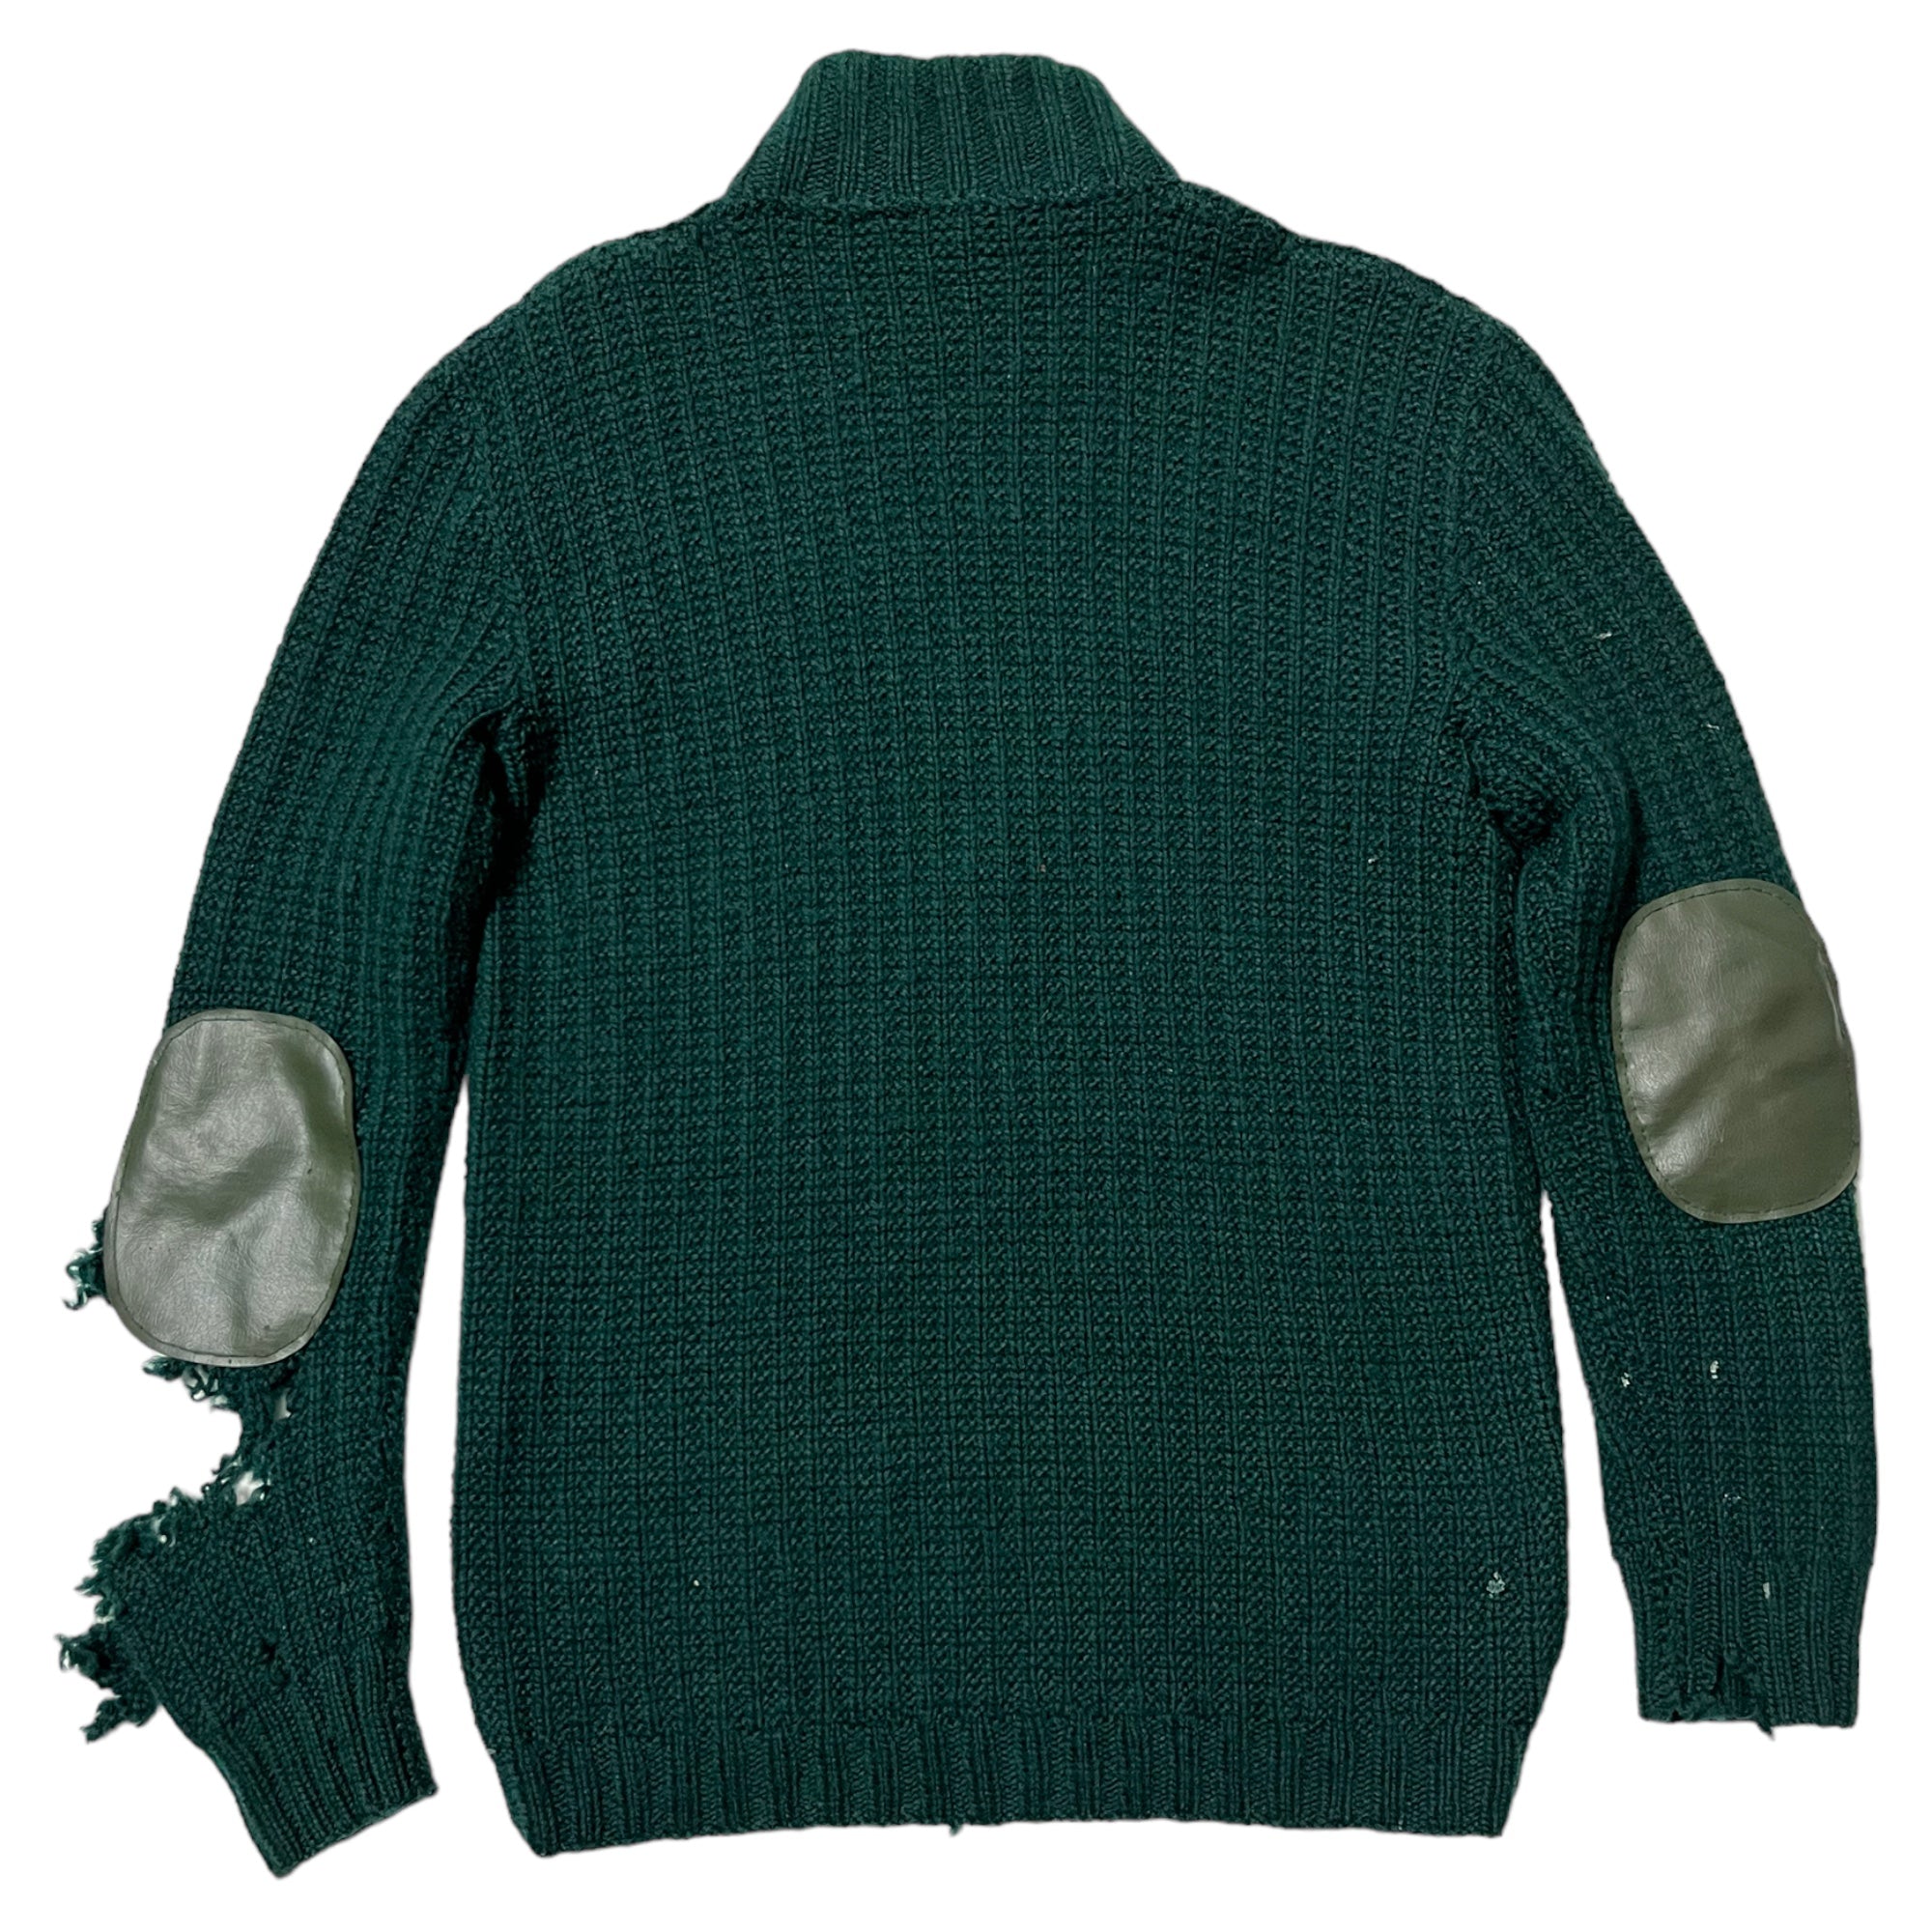 1940s Distressed French Knit Sweater - Forest Green - S/M